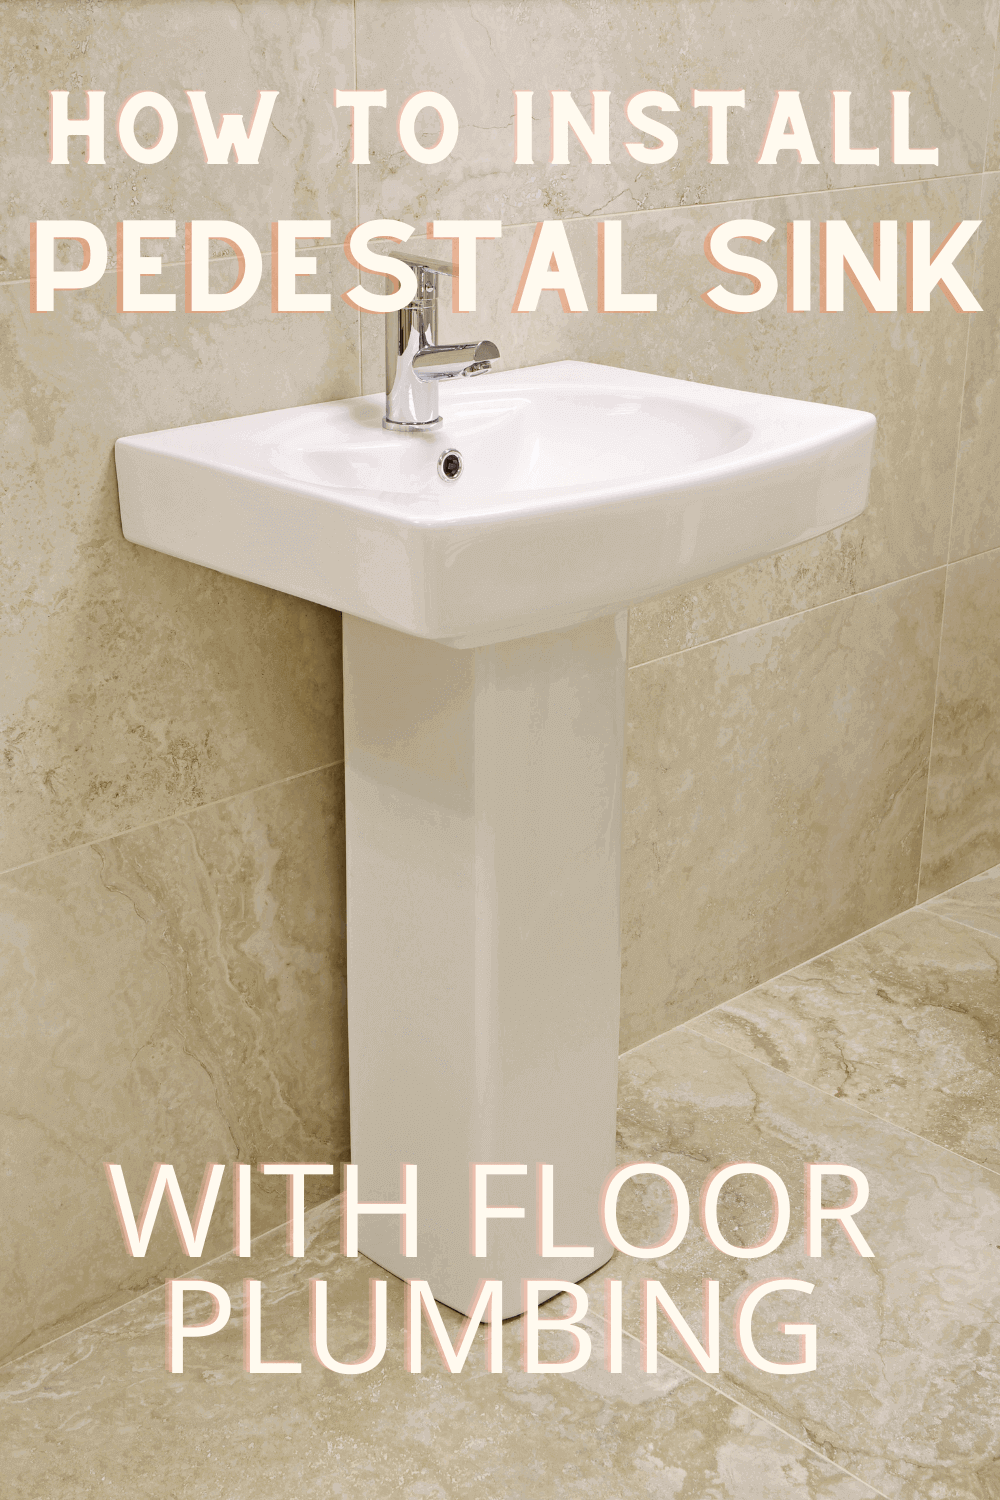 How to install a pedestal sink with floor plumbing